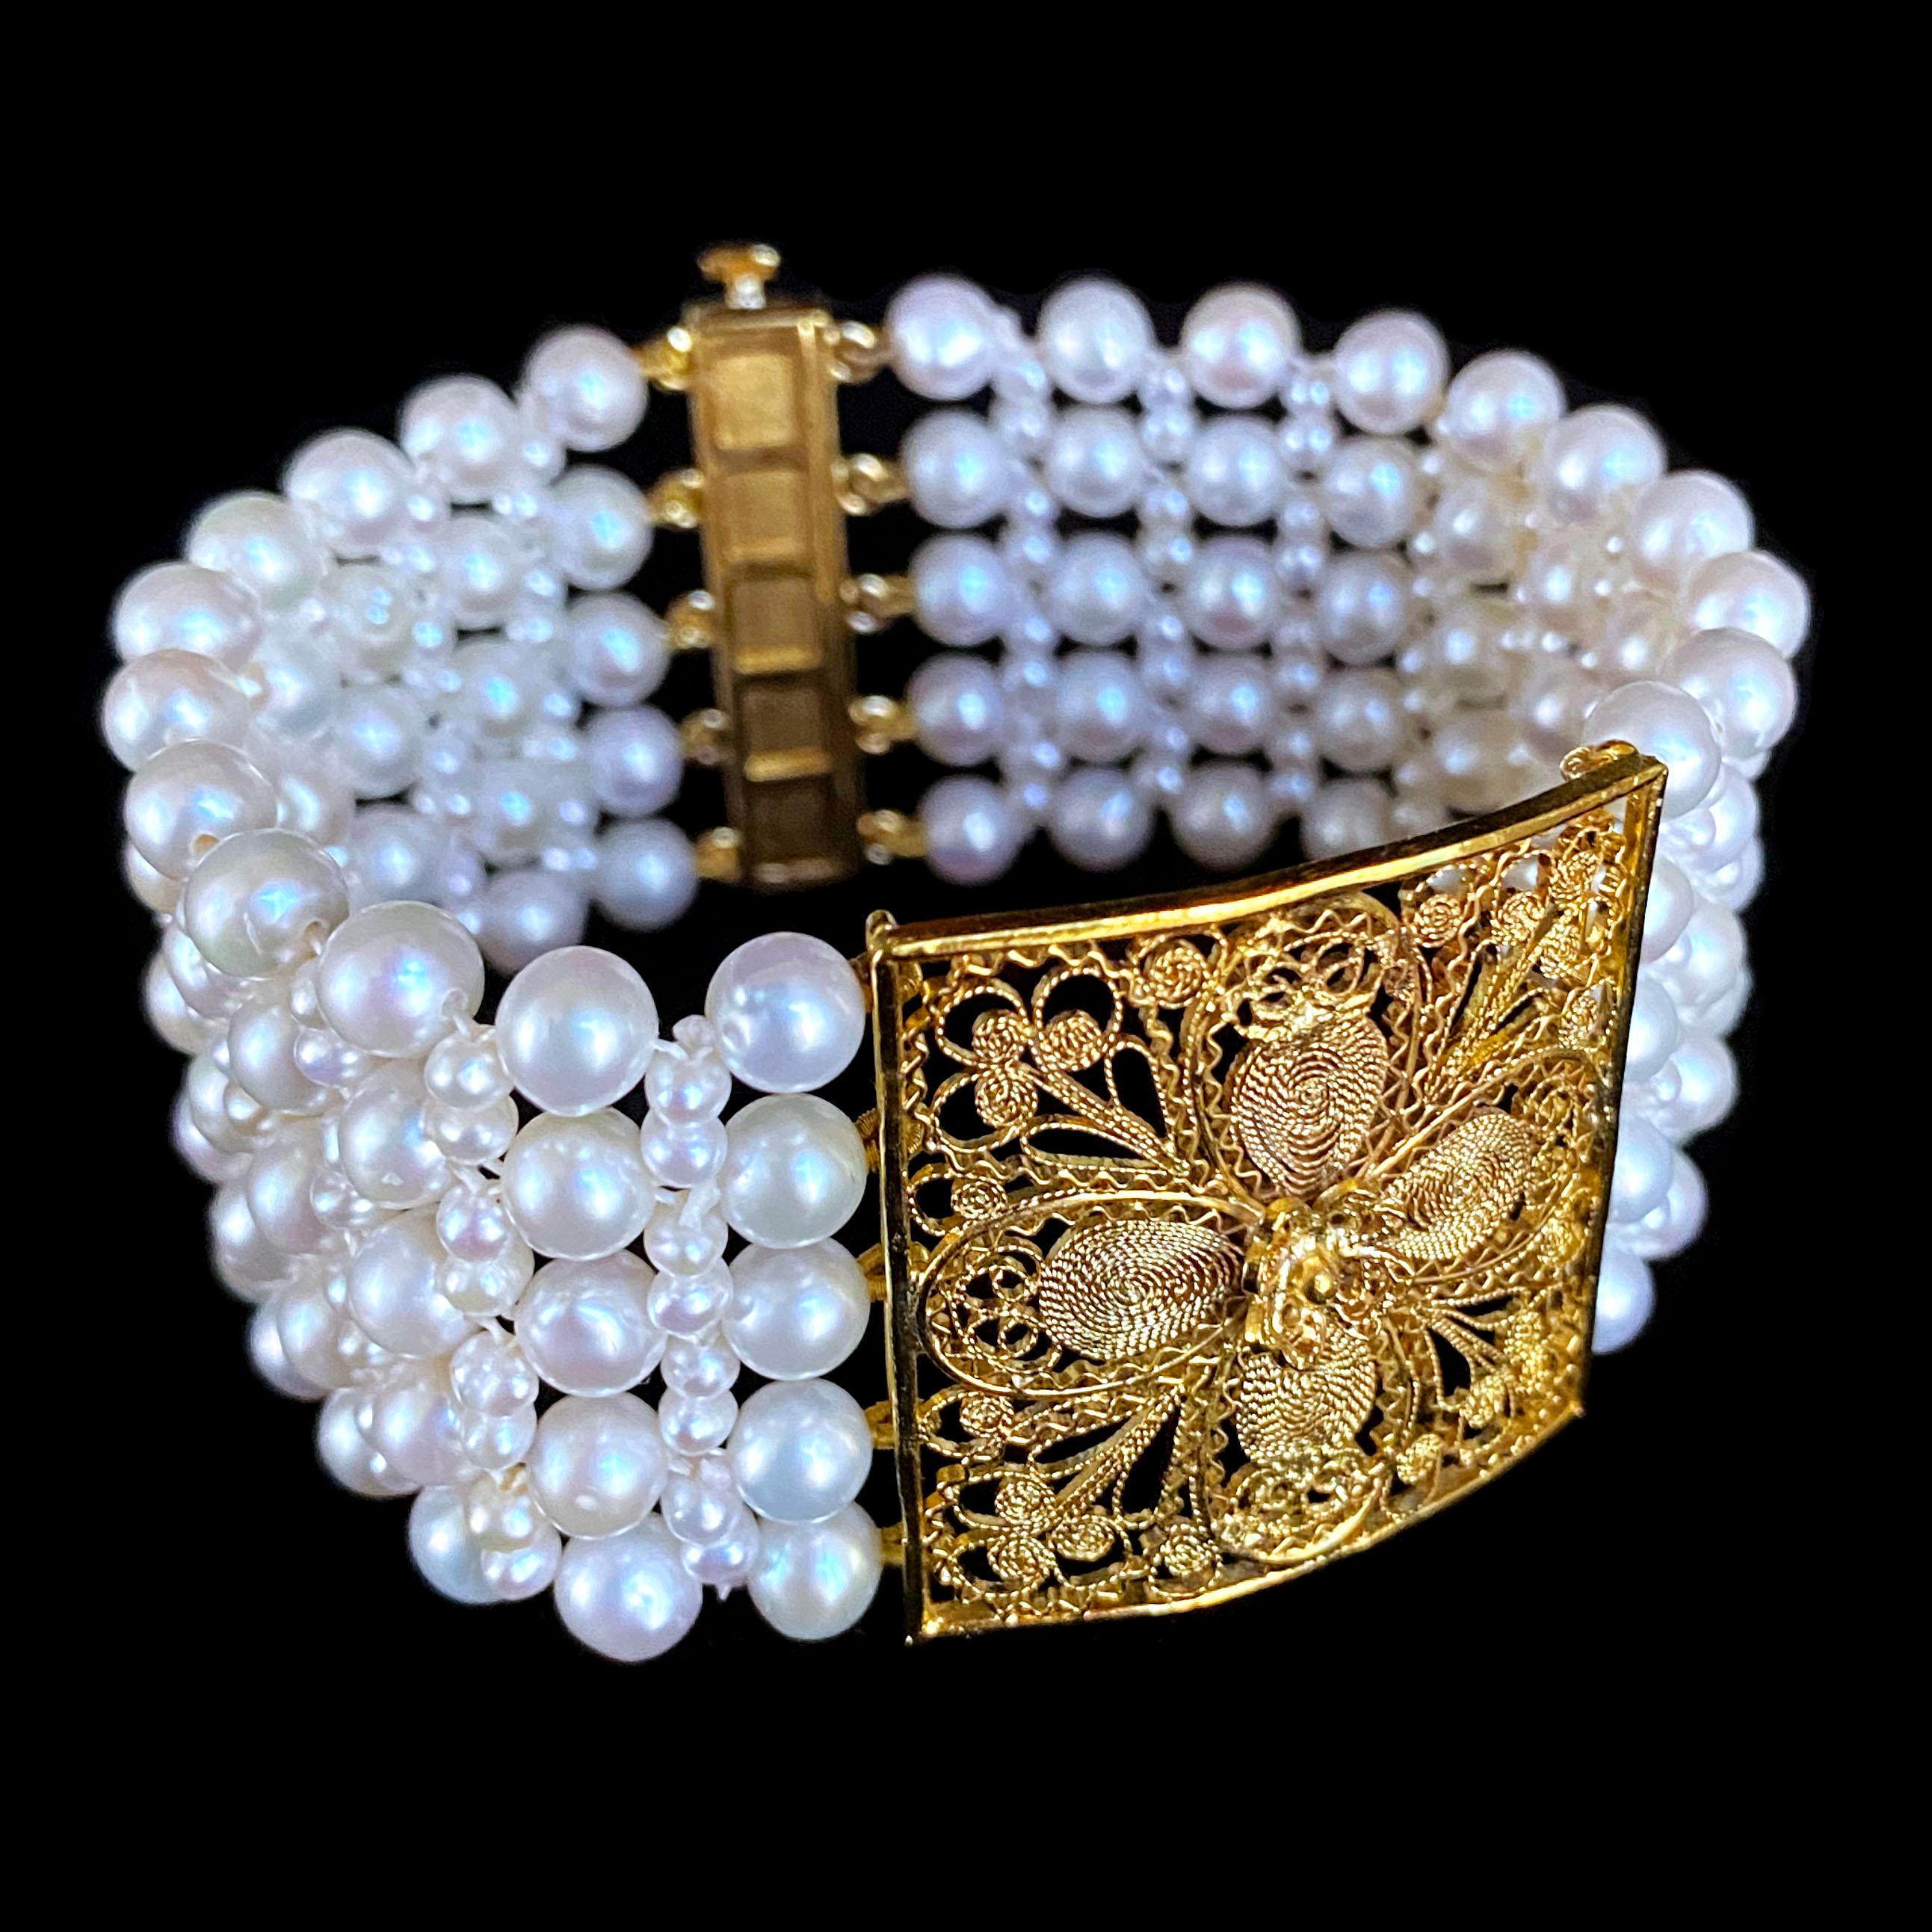 Women's Marina J. Pearl Woven Bracelet with 18k Yellow Gold Floral Centerpiece 